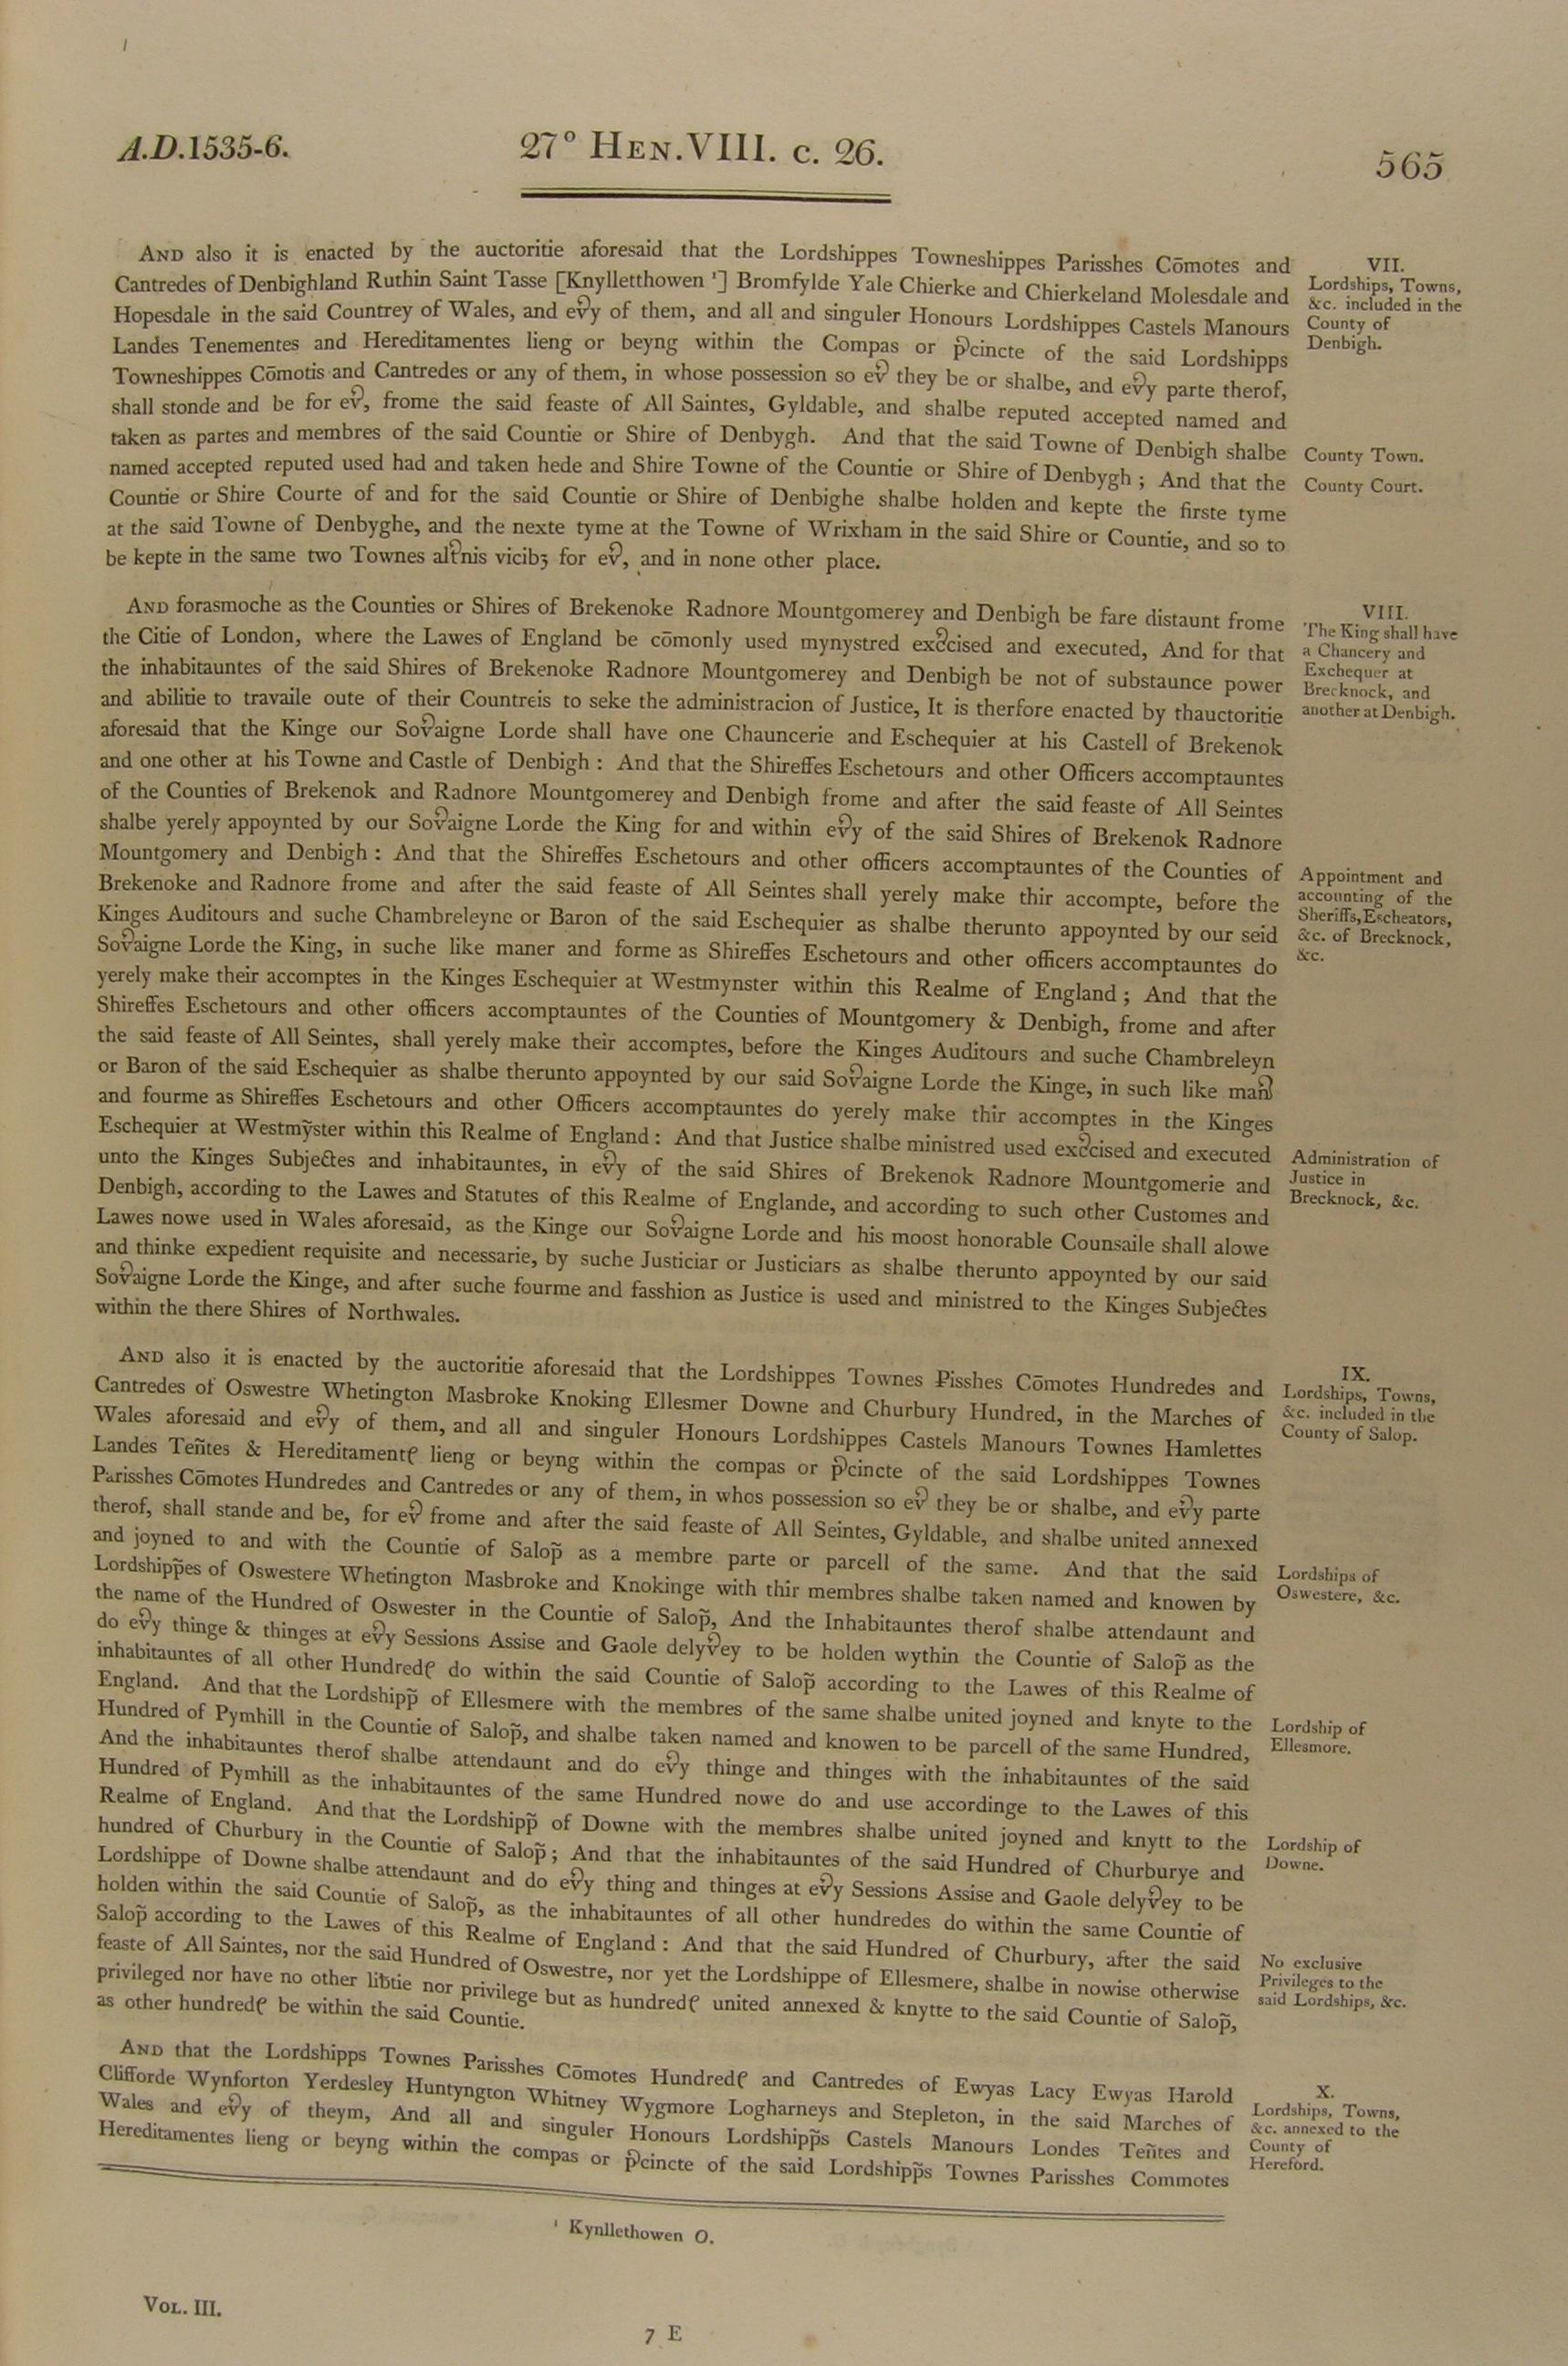 Image of 27 Henry VIII, c. 26 (page 3 of 7). Click for larger image.